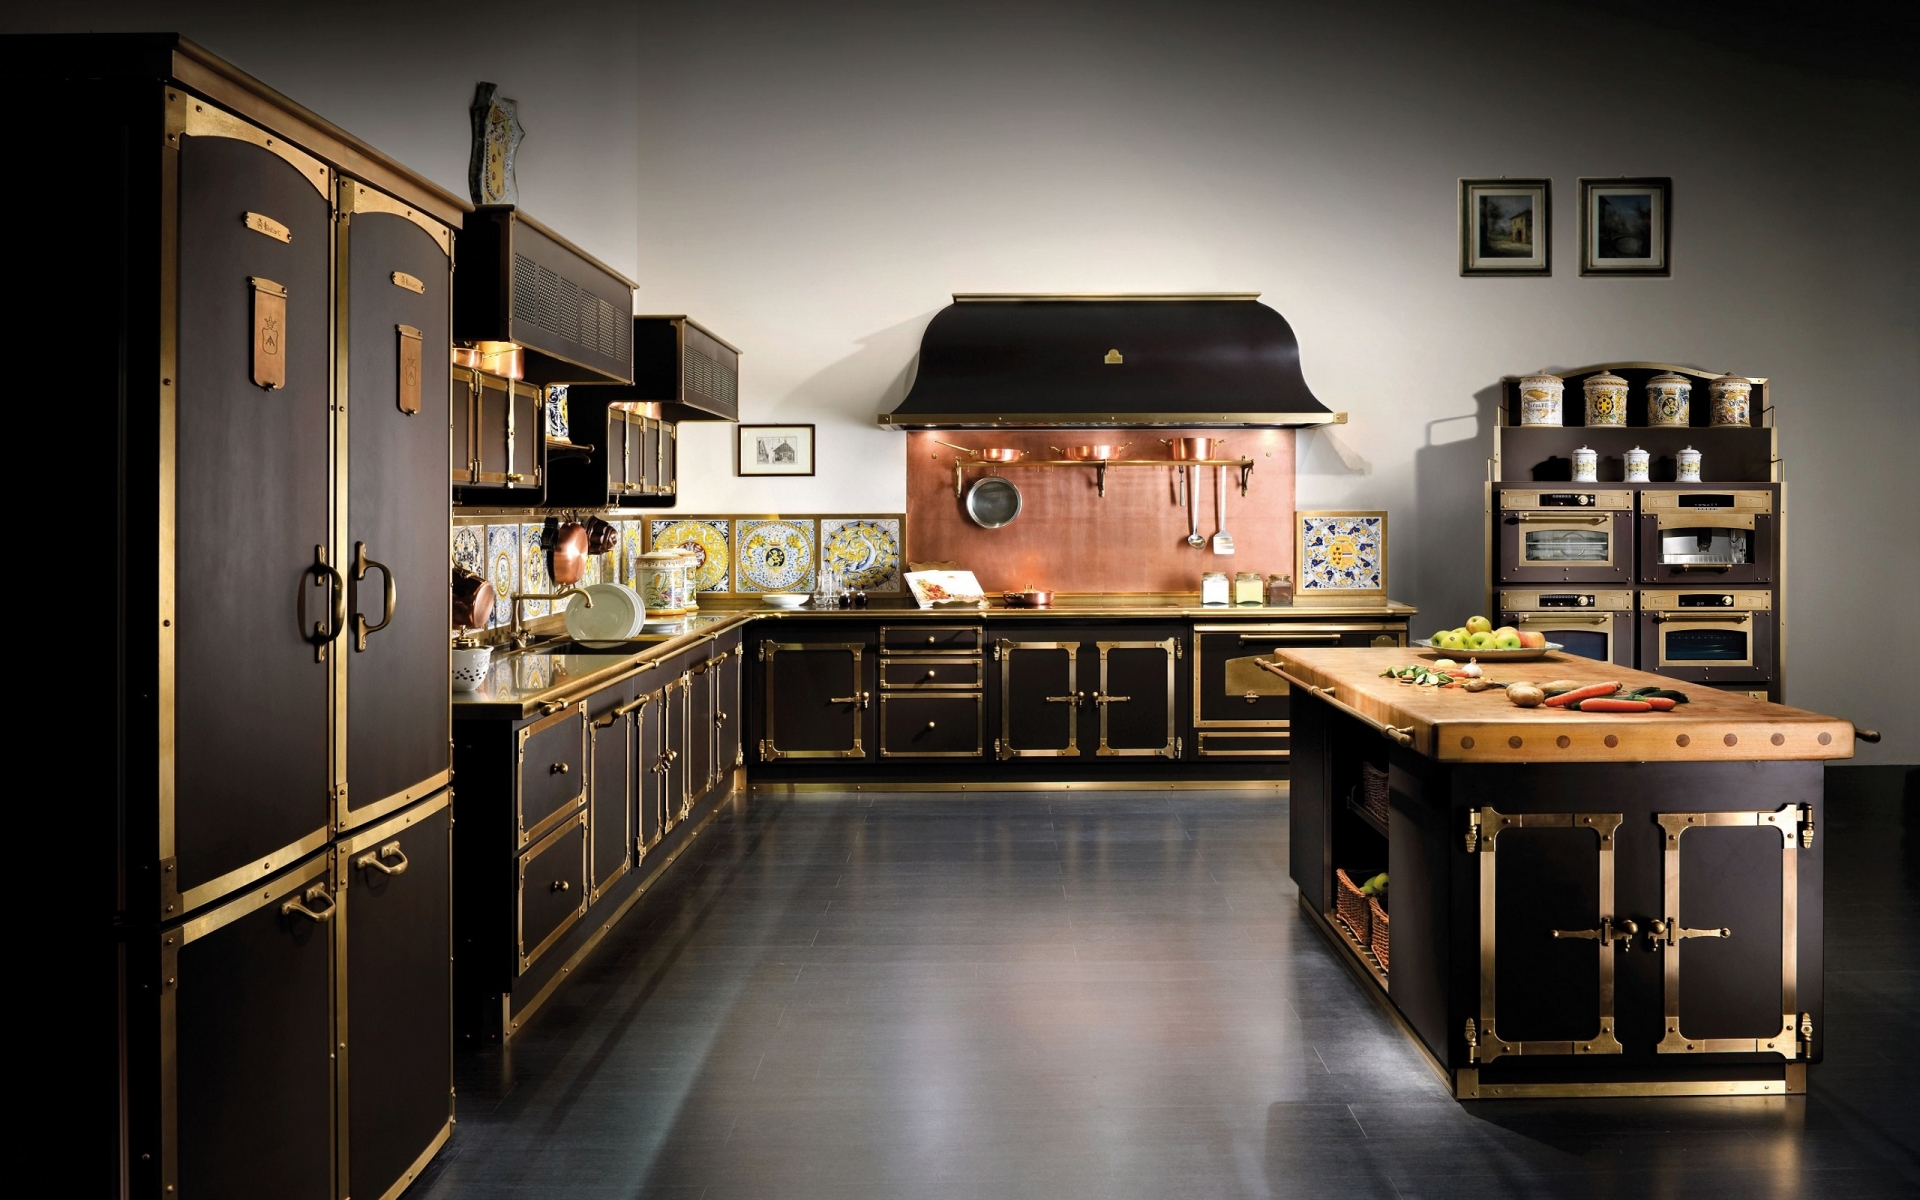 https://www.artchateau.com//images-articles/20083/box2/1-2-Officine-Gullo-Leading-Artisans-in-Fine-Italian-Kitchens-lg.jpg